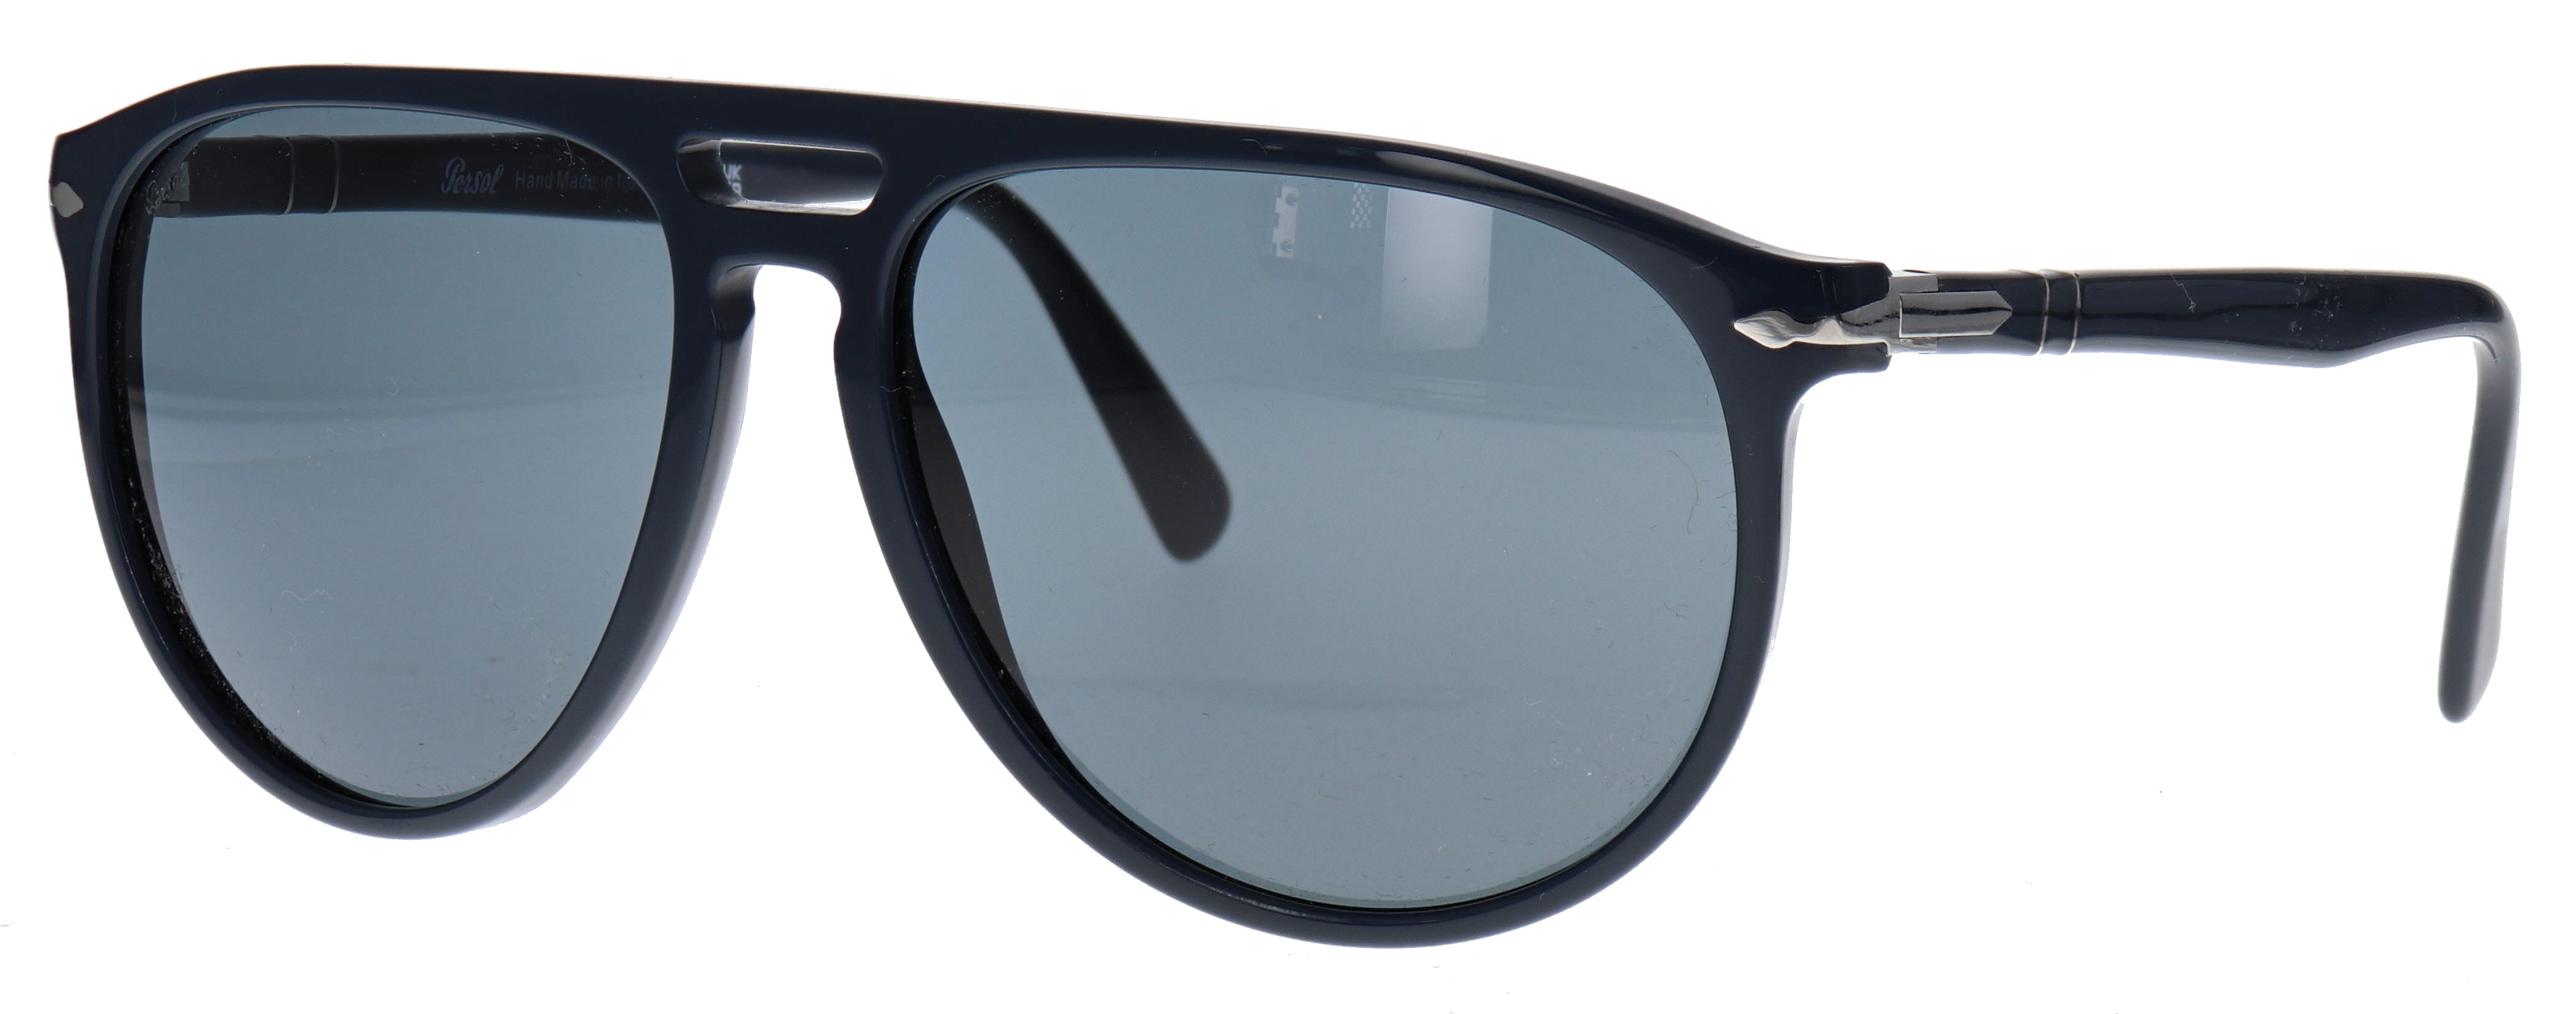 Persol 3311-S